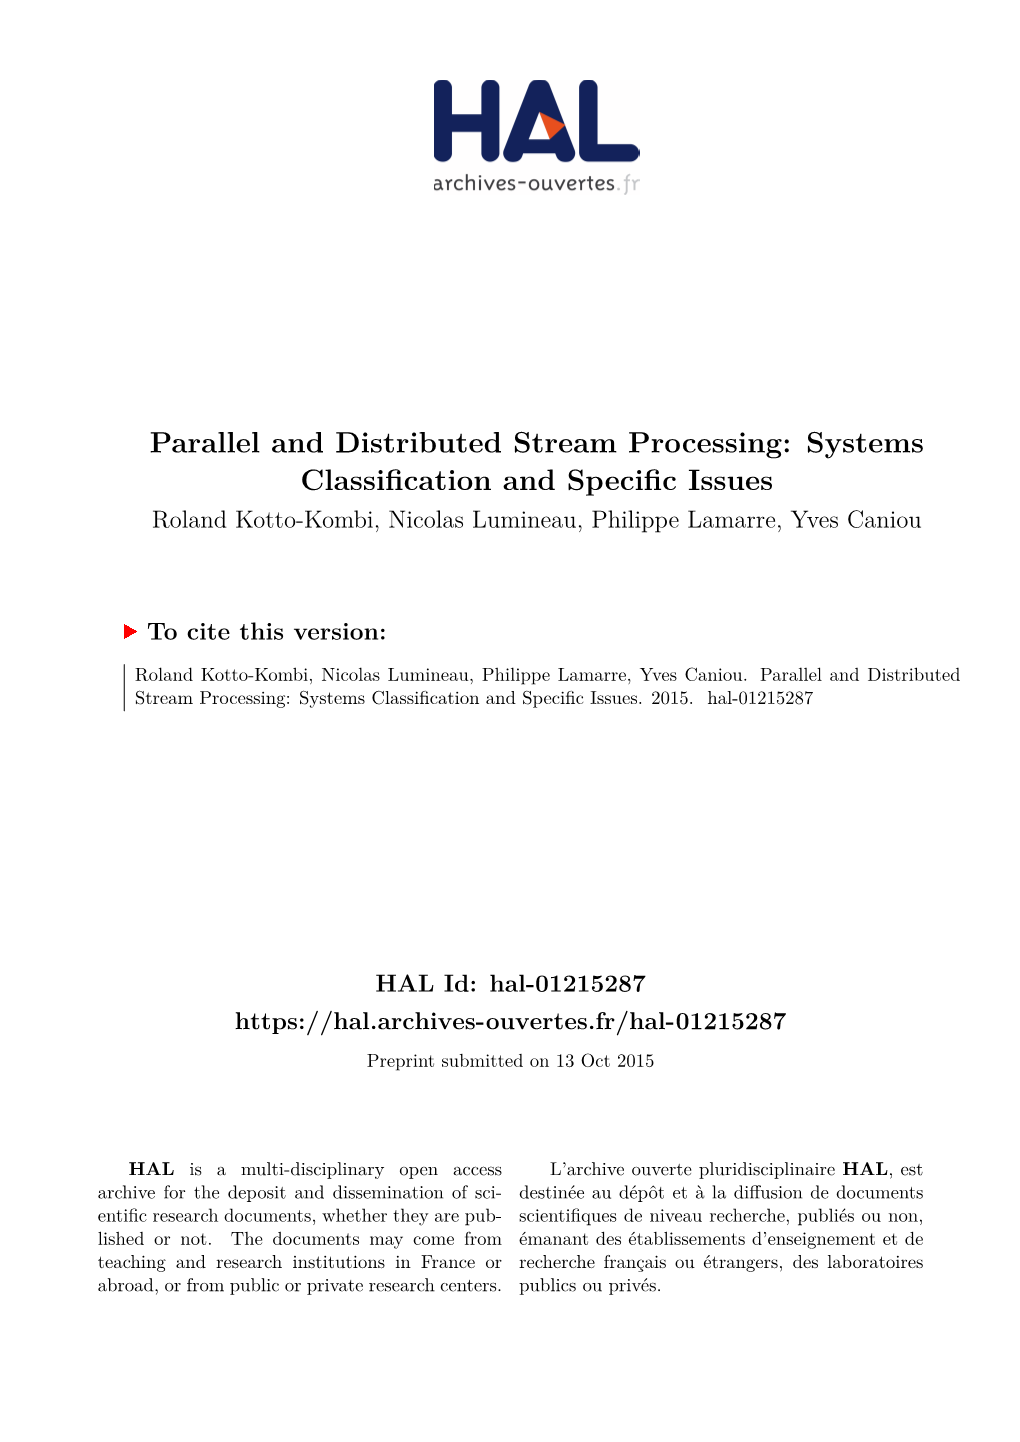 Parallel and Distributed Stream Processing: Systems Classification and Specific Issues Roland Kotto-Kombi, Nicolas Lumineau, Philippe Lamarre, Yves Caniou